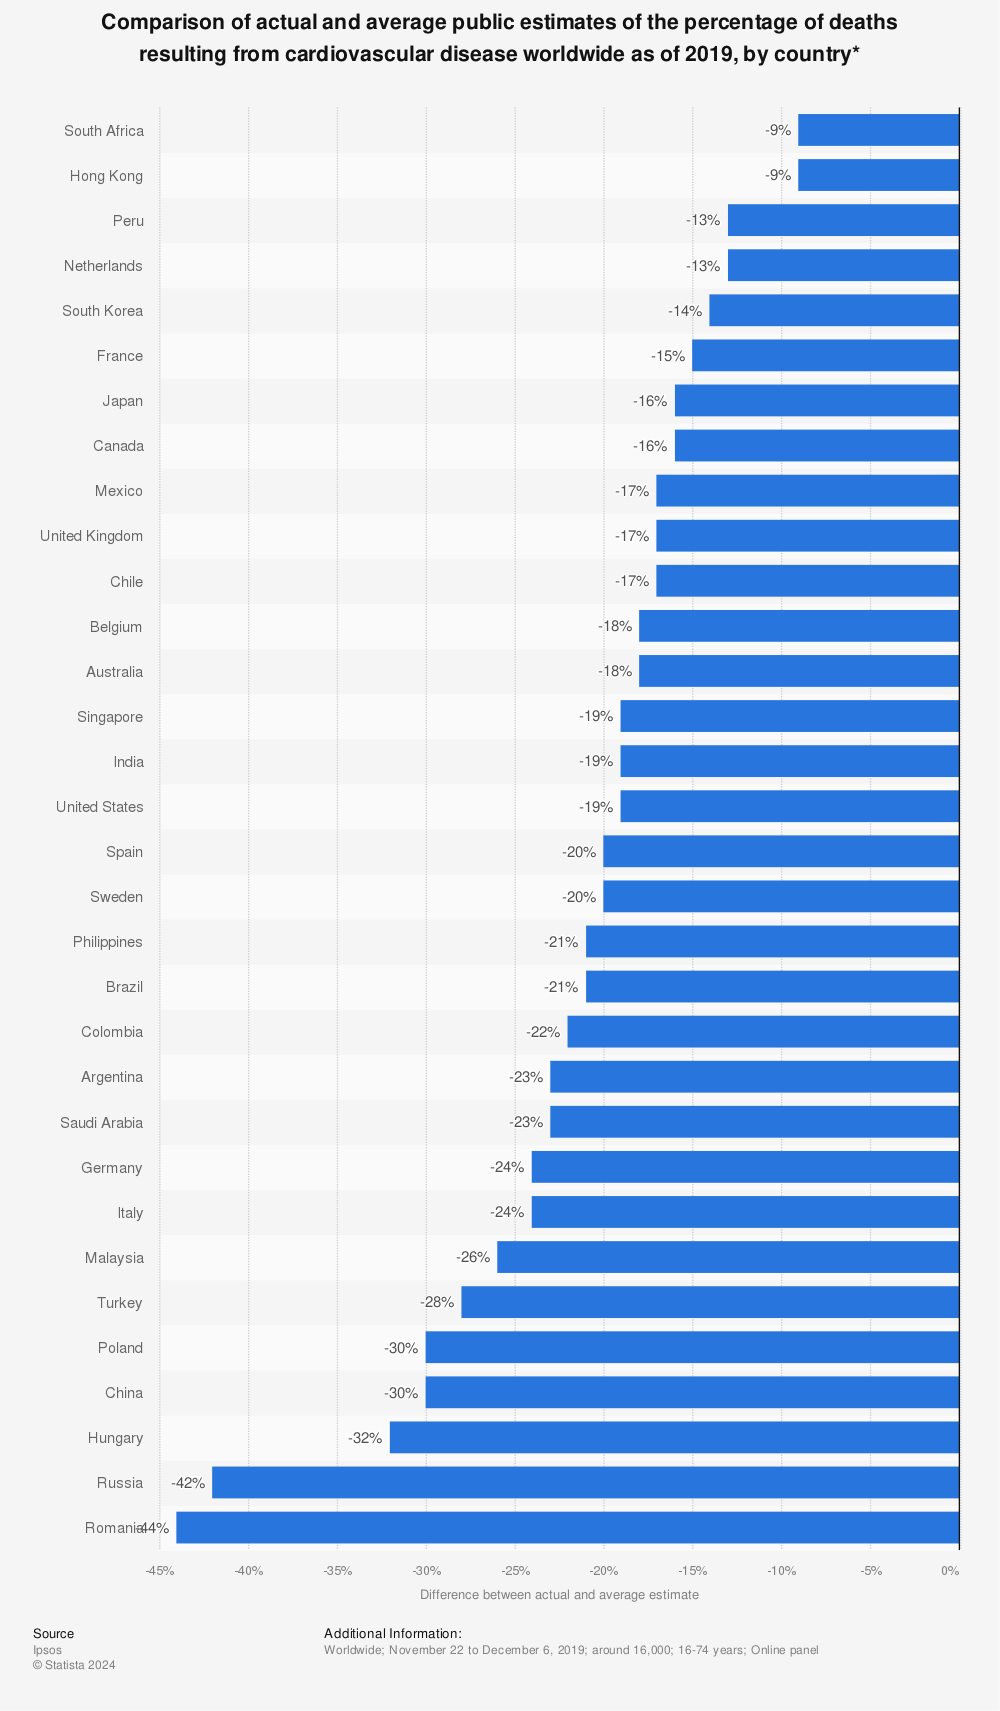 Statistic: Comparison of actual and average public estimates of the percentage of deaths resulting from cardiovascular disease worldwide as of 2019, by country* | Statista